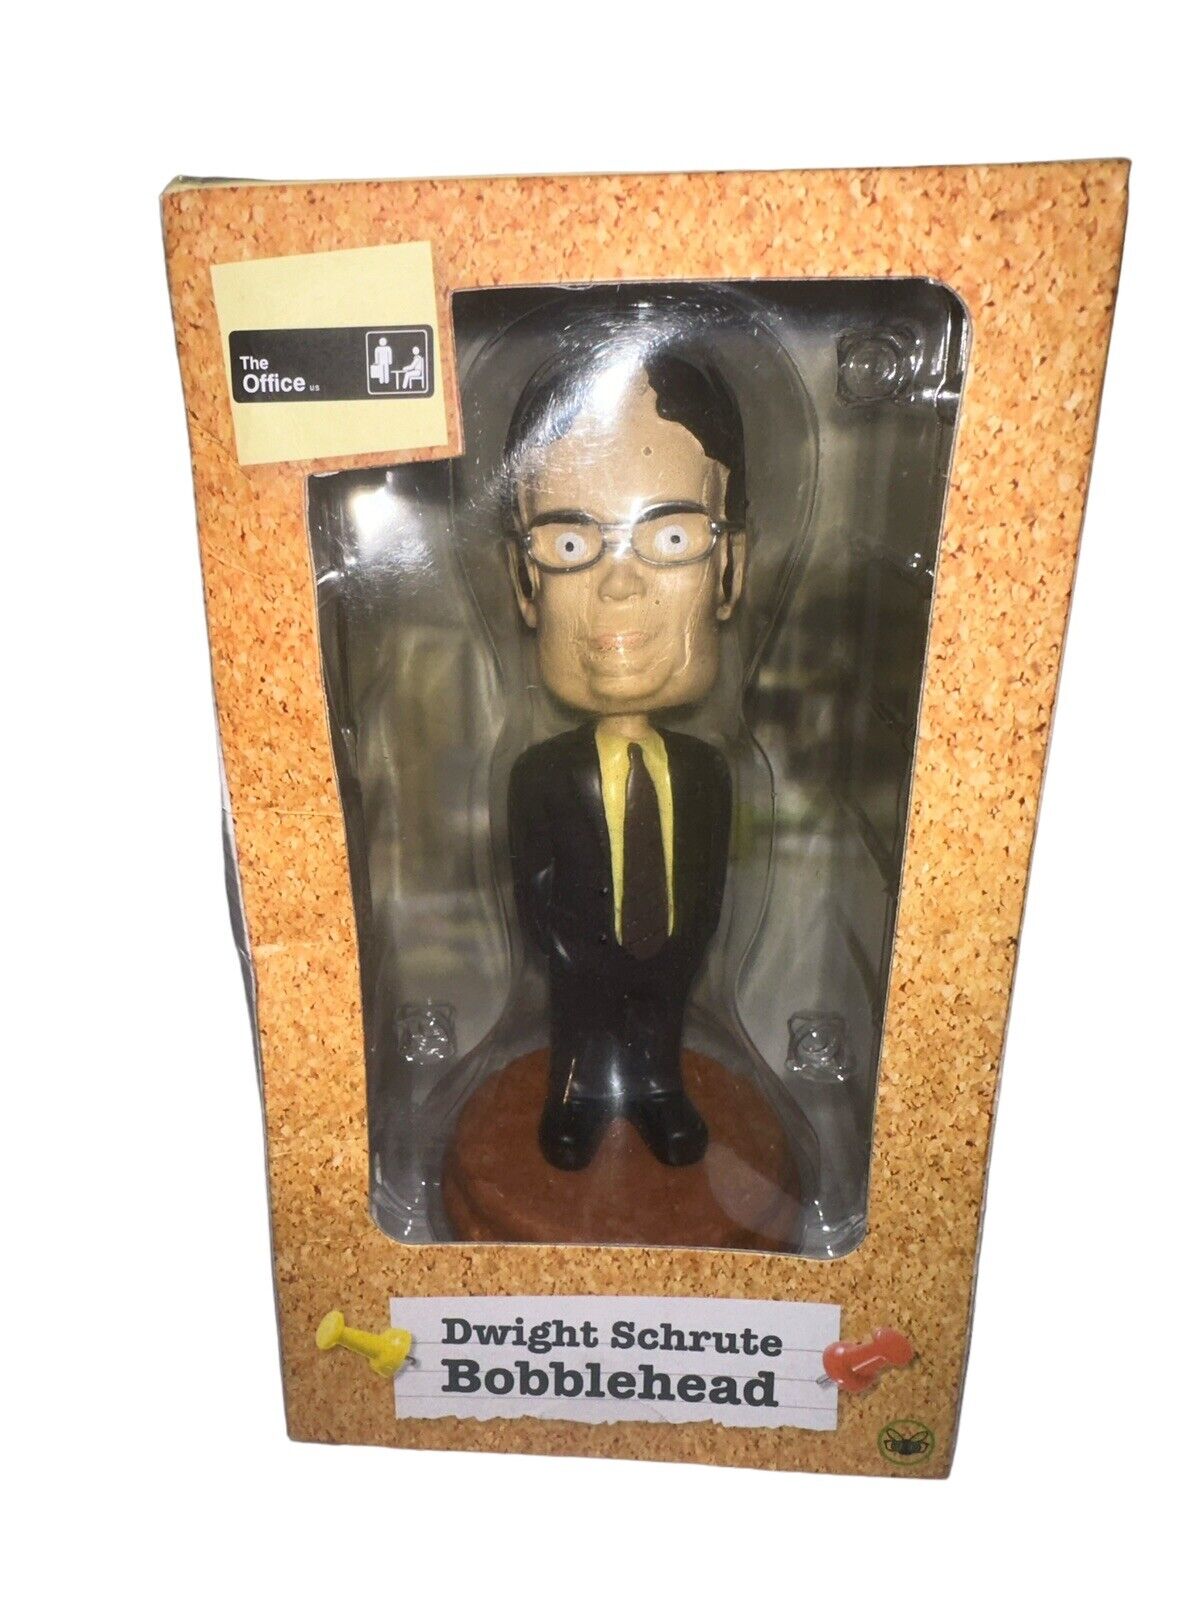 Dwight Schrute Bobblehead Figure The Office OFFICIAL NBC Universal CULTUREFLY